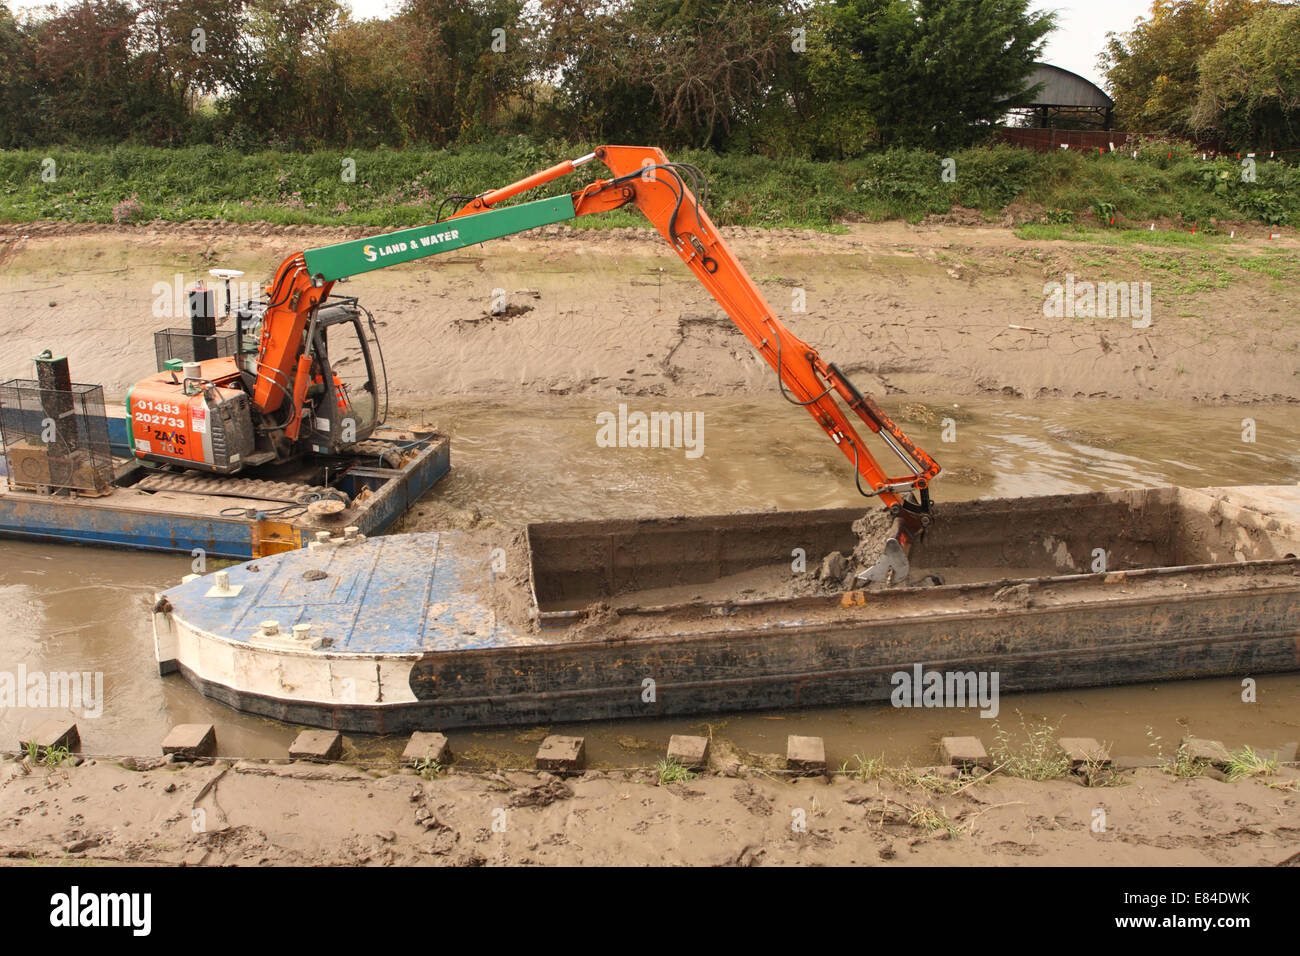 Burrowbridge, Somerset, UK. 30th September, 2014.  Dredging continues along the River Parrett on the Somerset Levels. A floating excavator takes river silt from mid channel of the Parrett and offloads it into a barge. The Environment Agency have so far dredged over 6km of river with a target of 8km by the end of October 2014. Stock Photo